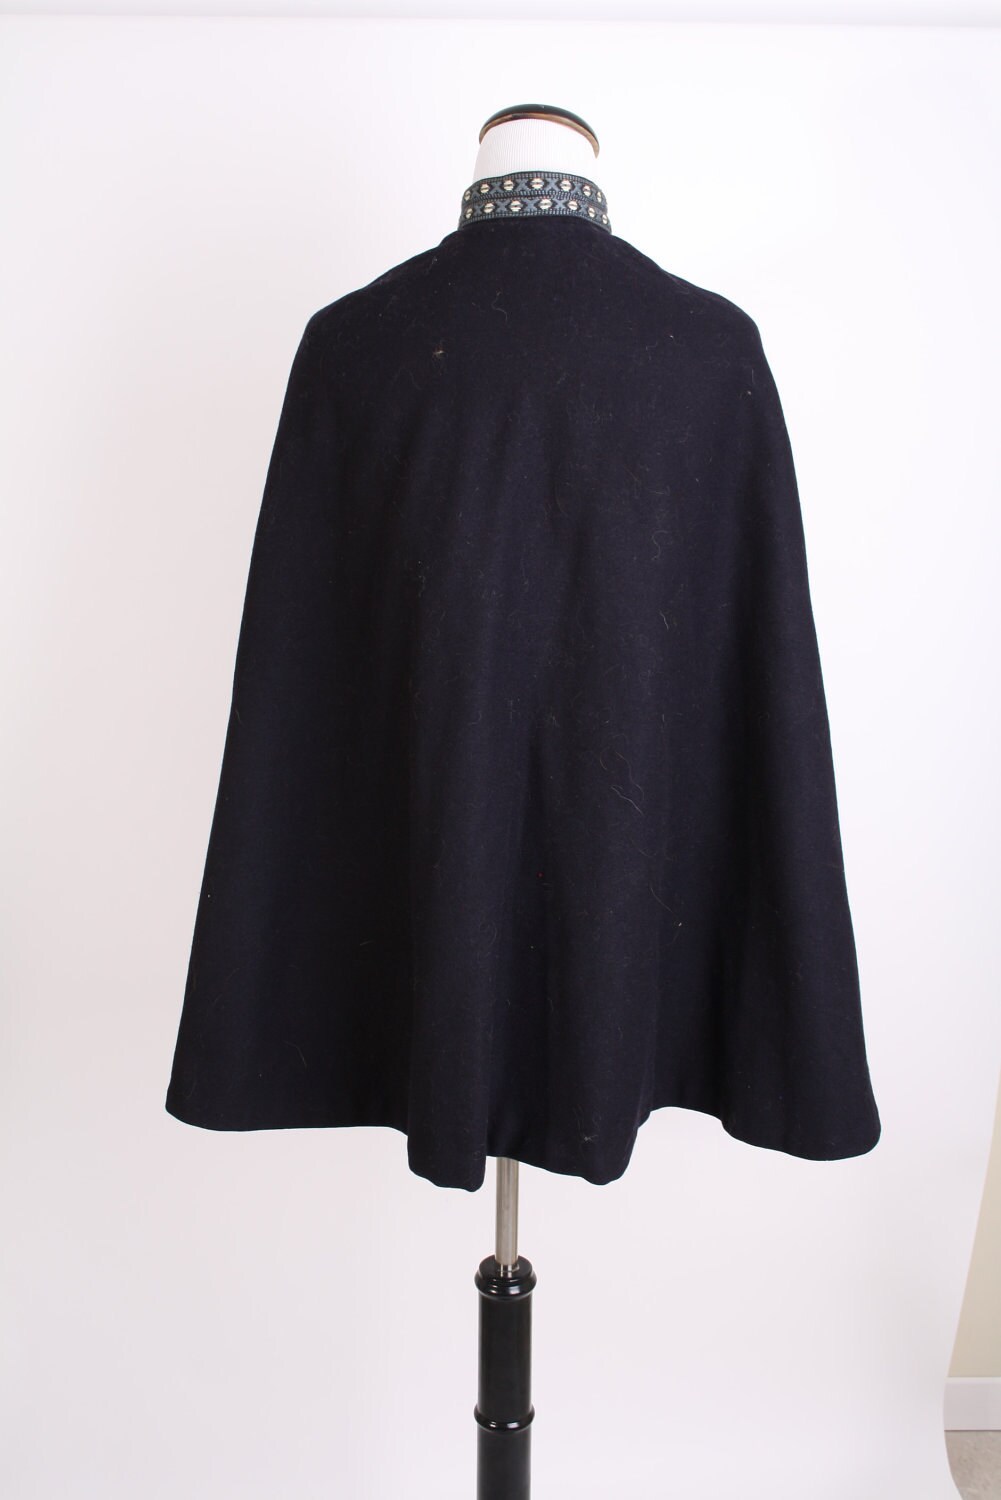 Cape Jacket / Cloak / Wool / 1940s Cape / Opera / Navy and Red